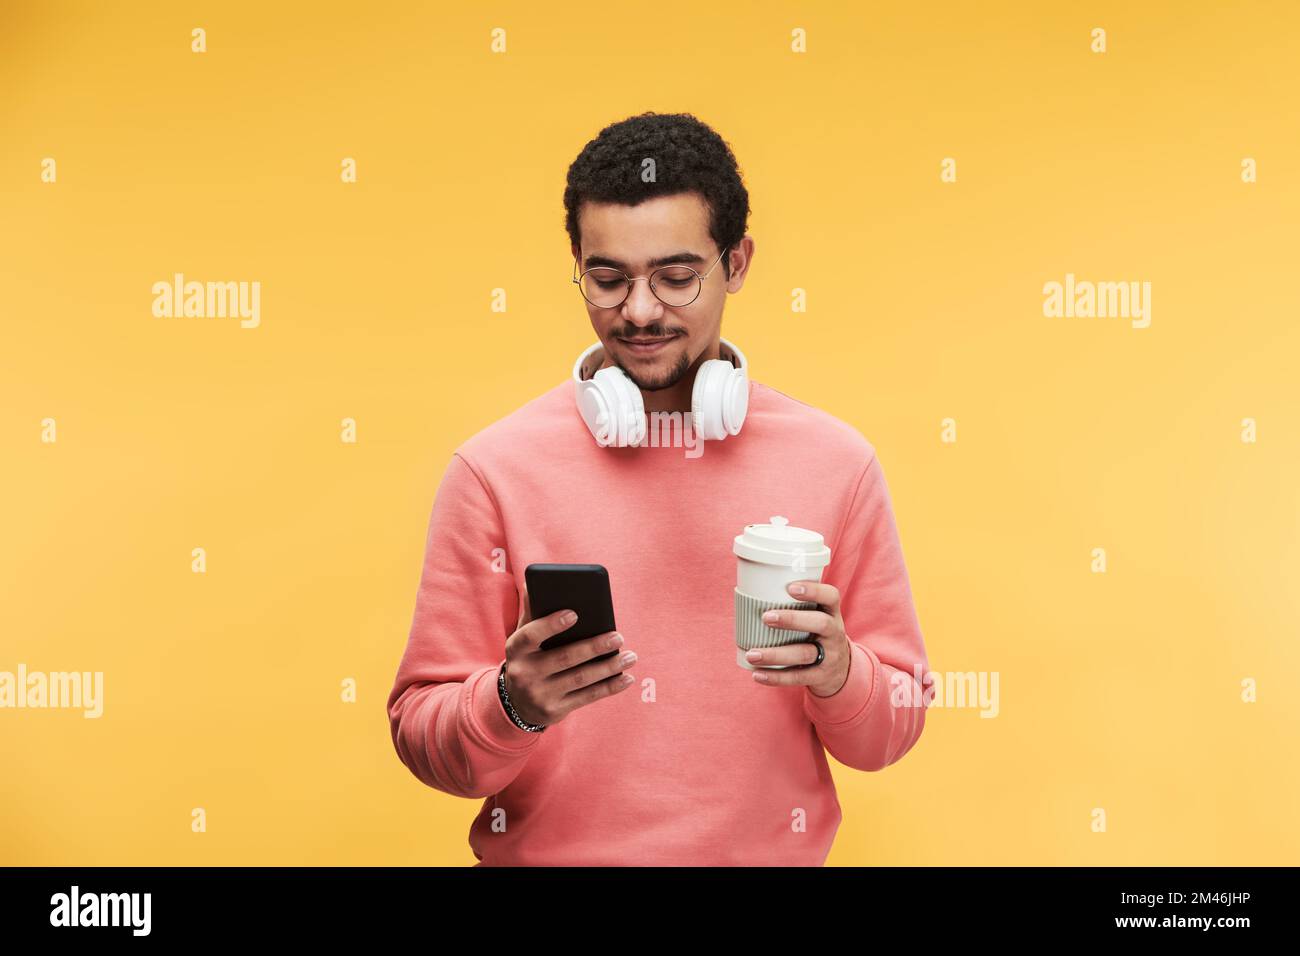 Young multi-ethnic man with white headphones around neck using smartphone and having cup of coffee against yellow background Stock Photo